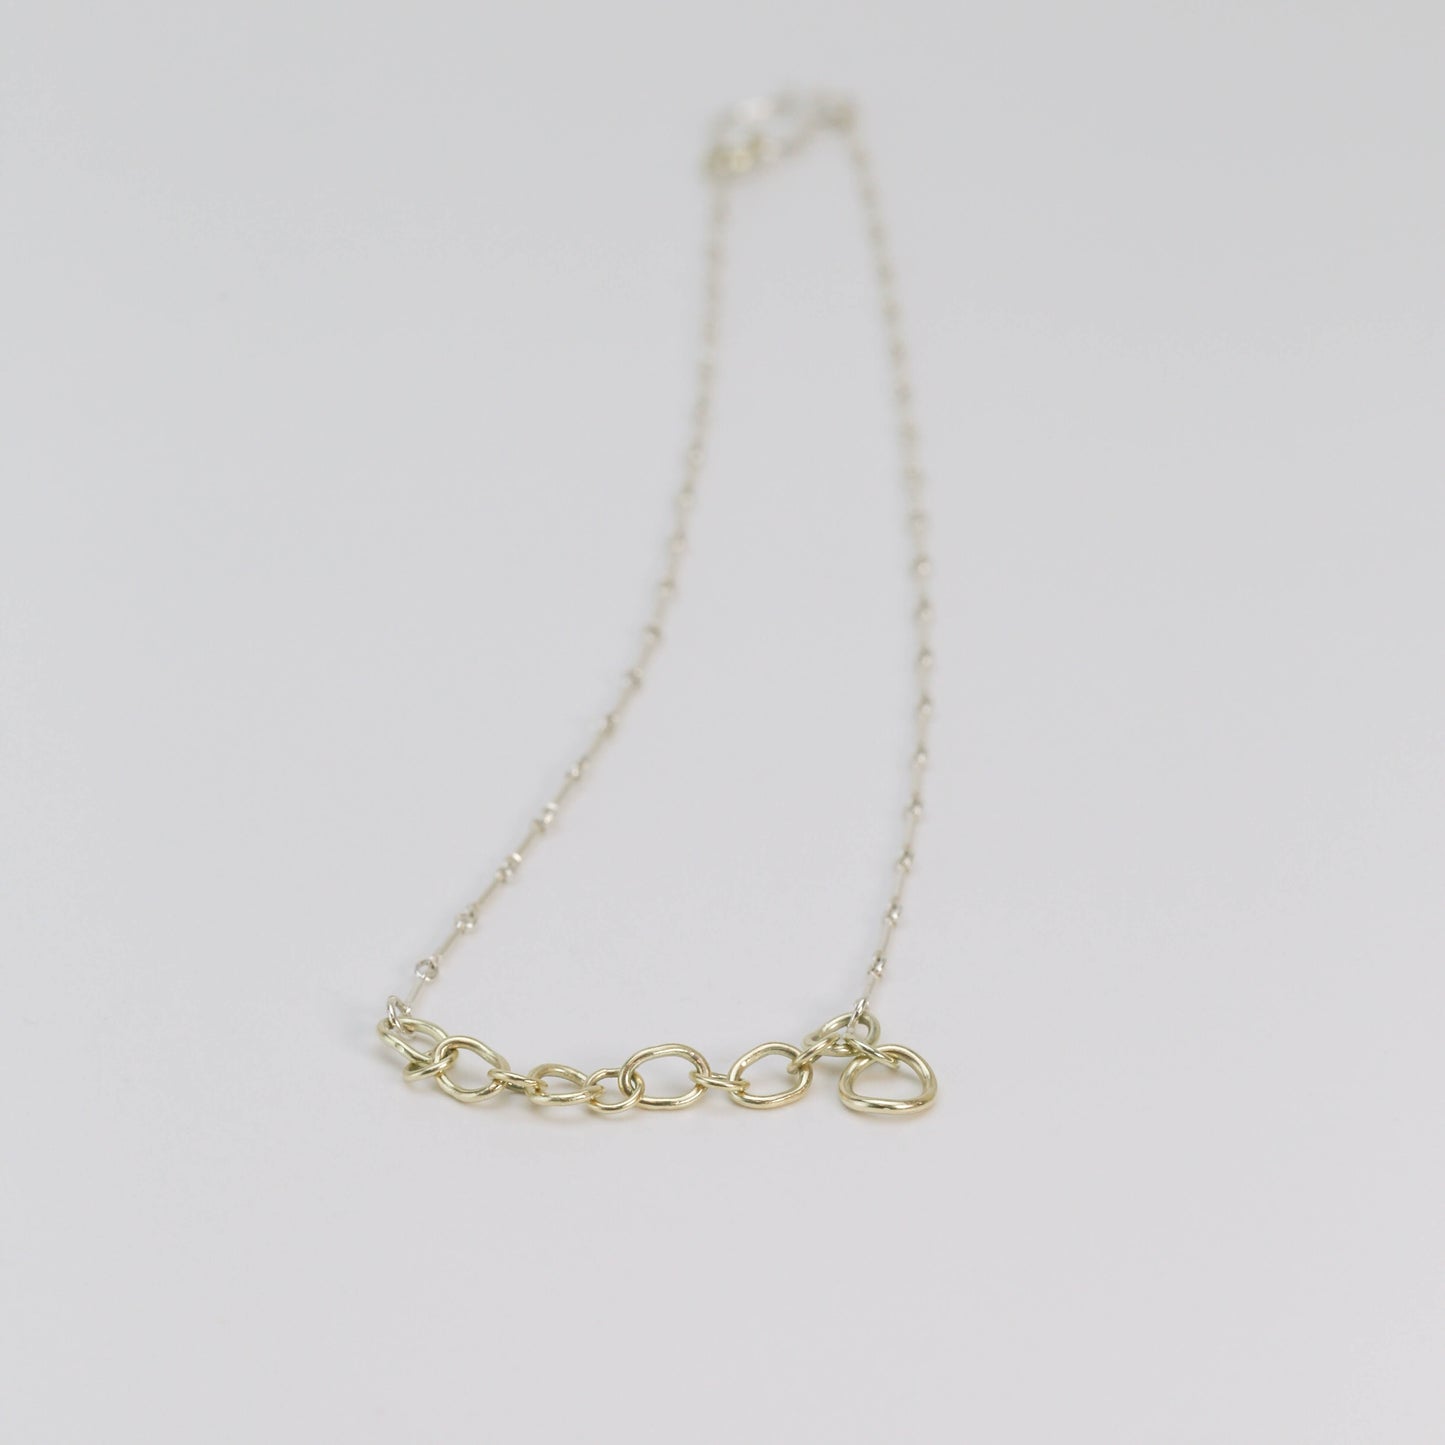 CONTOUR - SG Necklace 14k Gold With Sterling Silver Bar Chain.